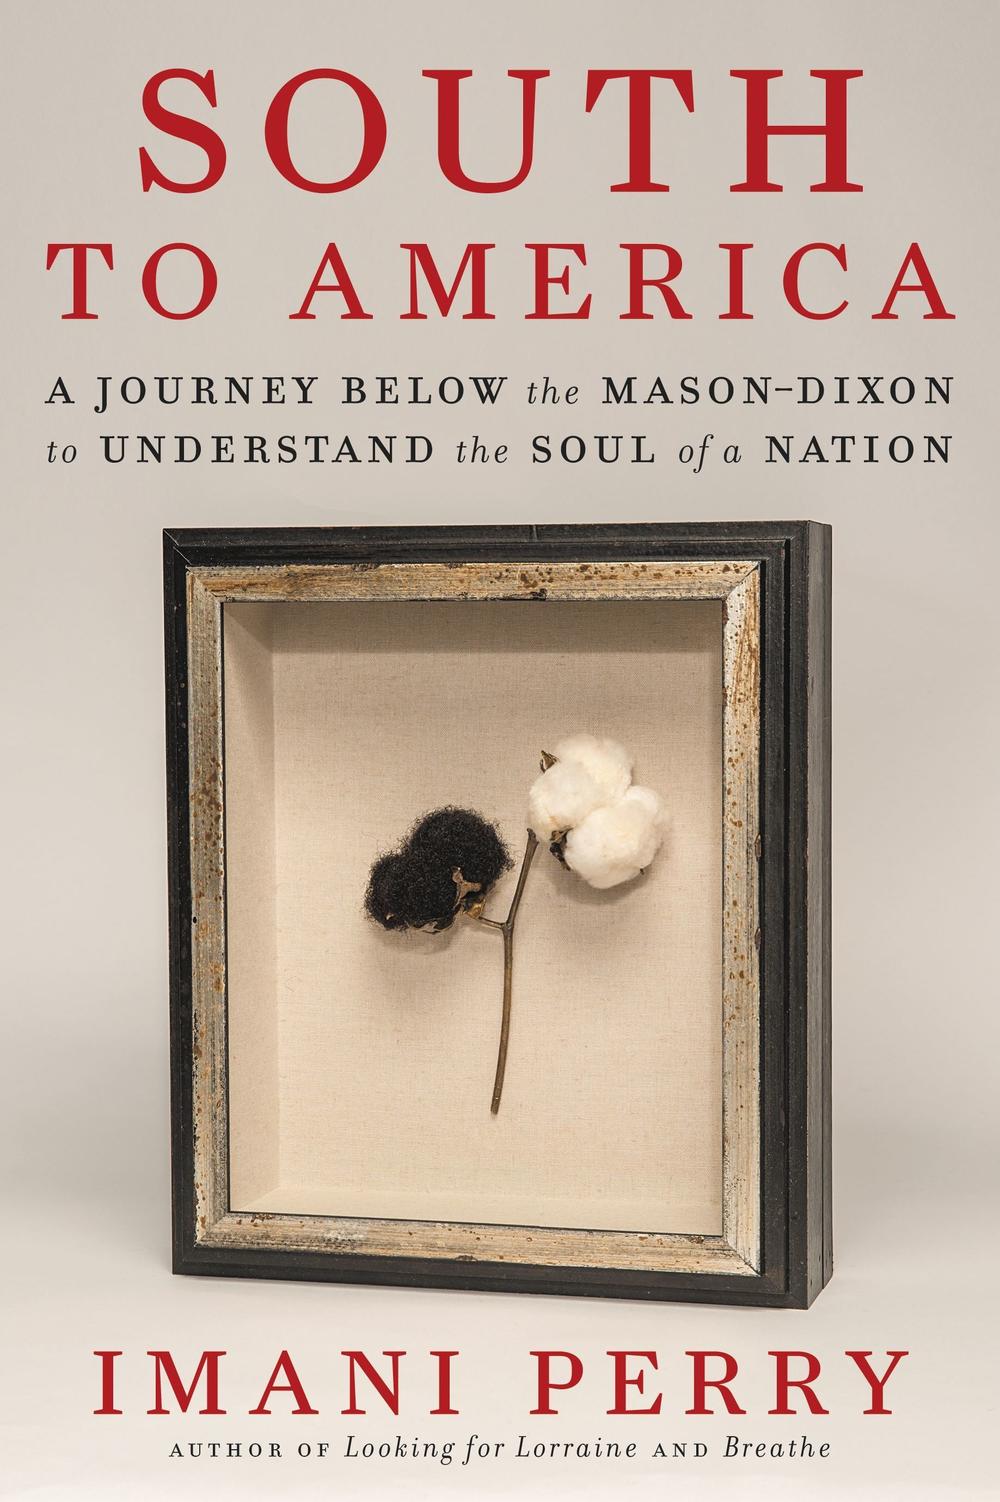 The book <em>South to America: A Journey Below the Mason-Dixon to Understand the Soul of a Nation</em>.